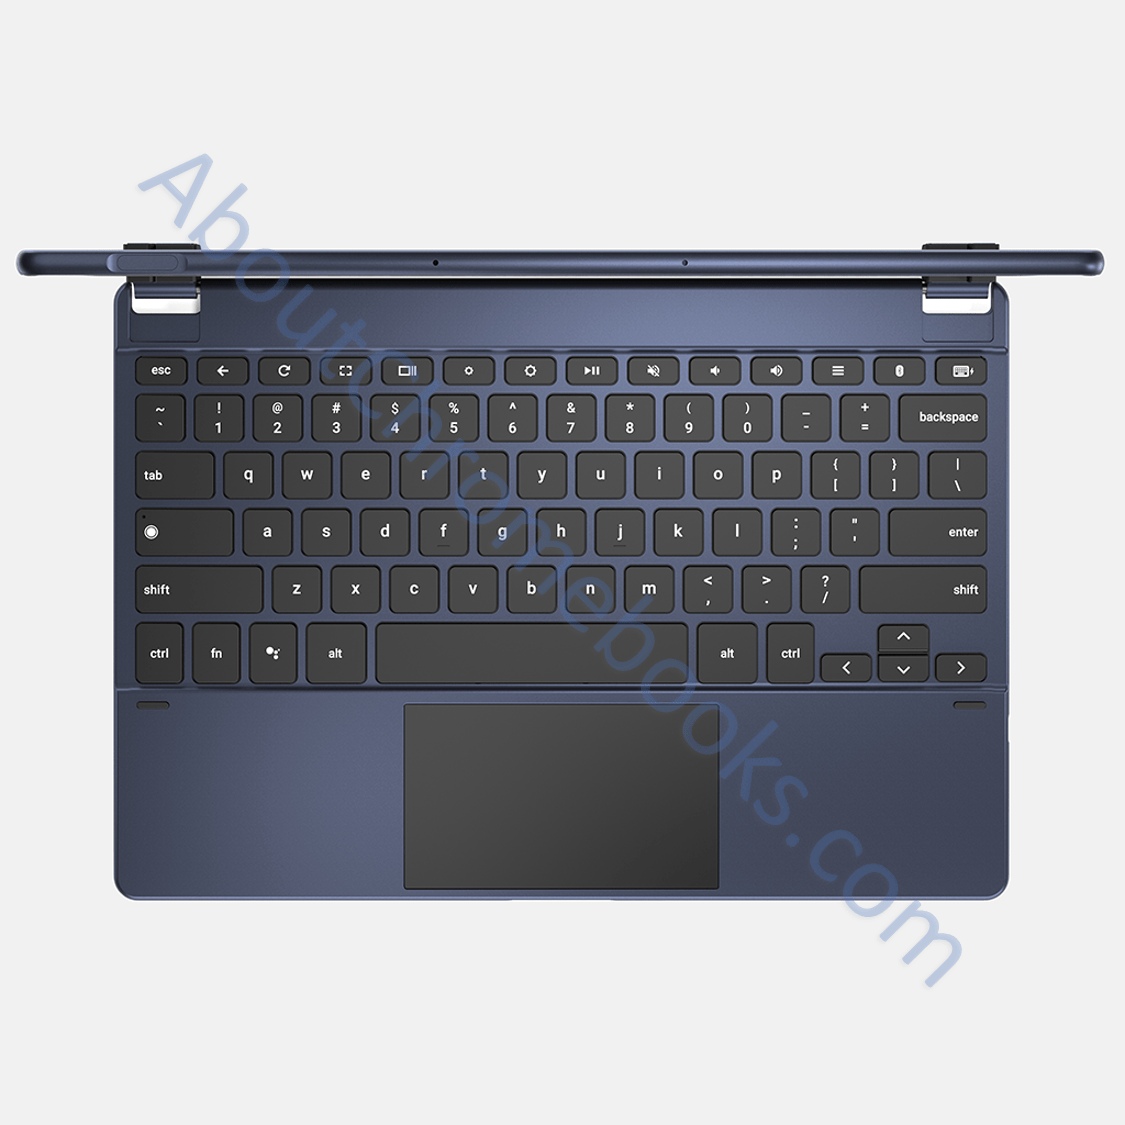 Wallaby-keyboard-with-Chrome-tablet-top.png